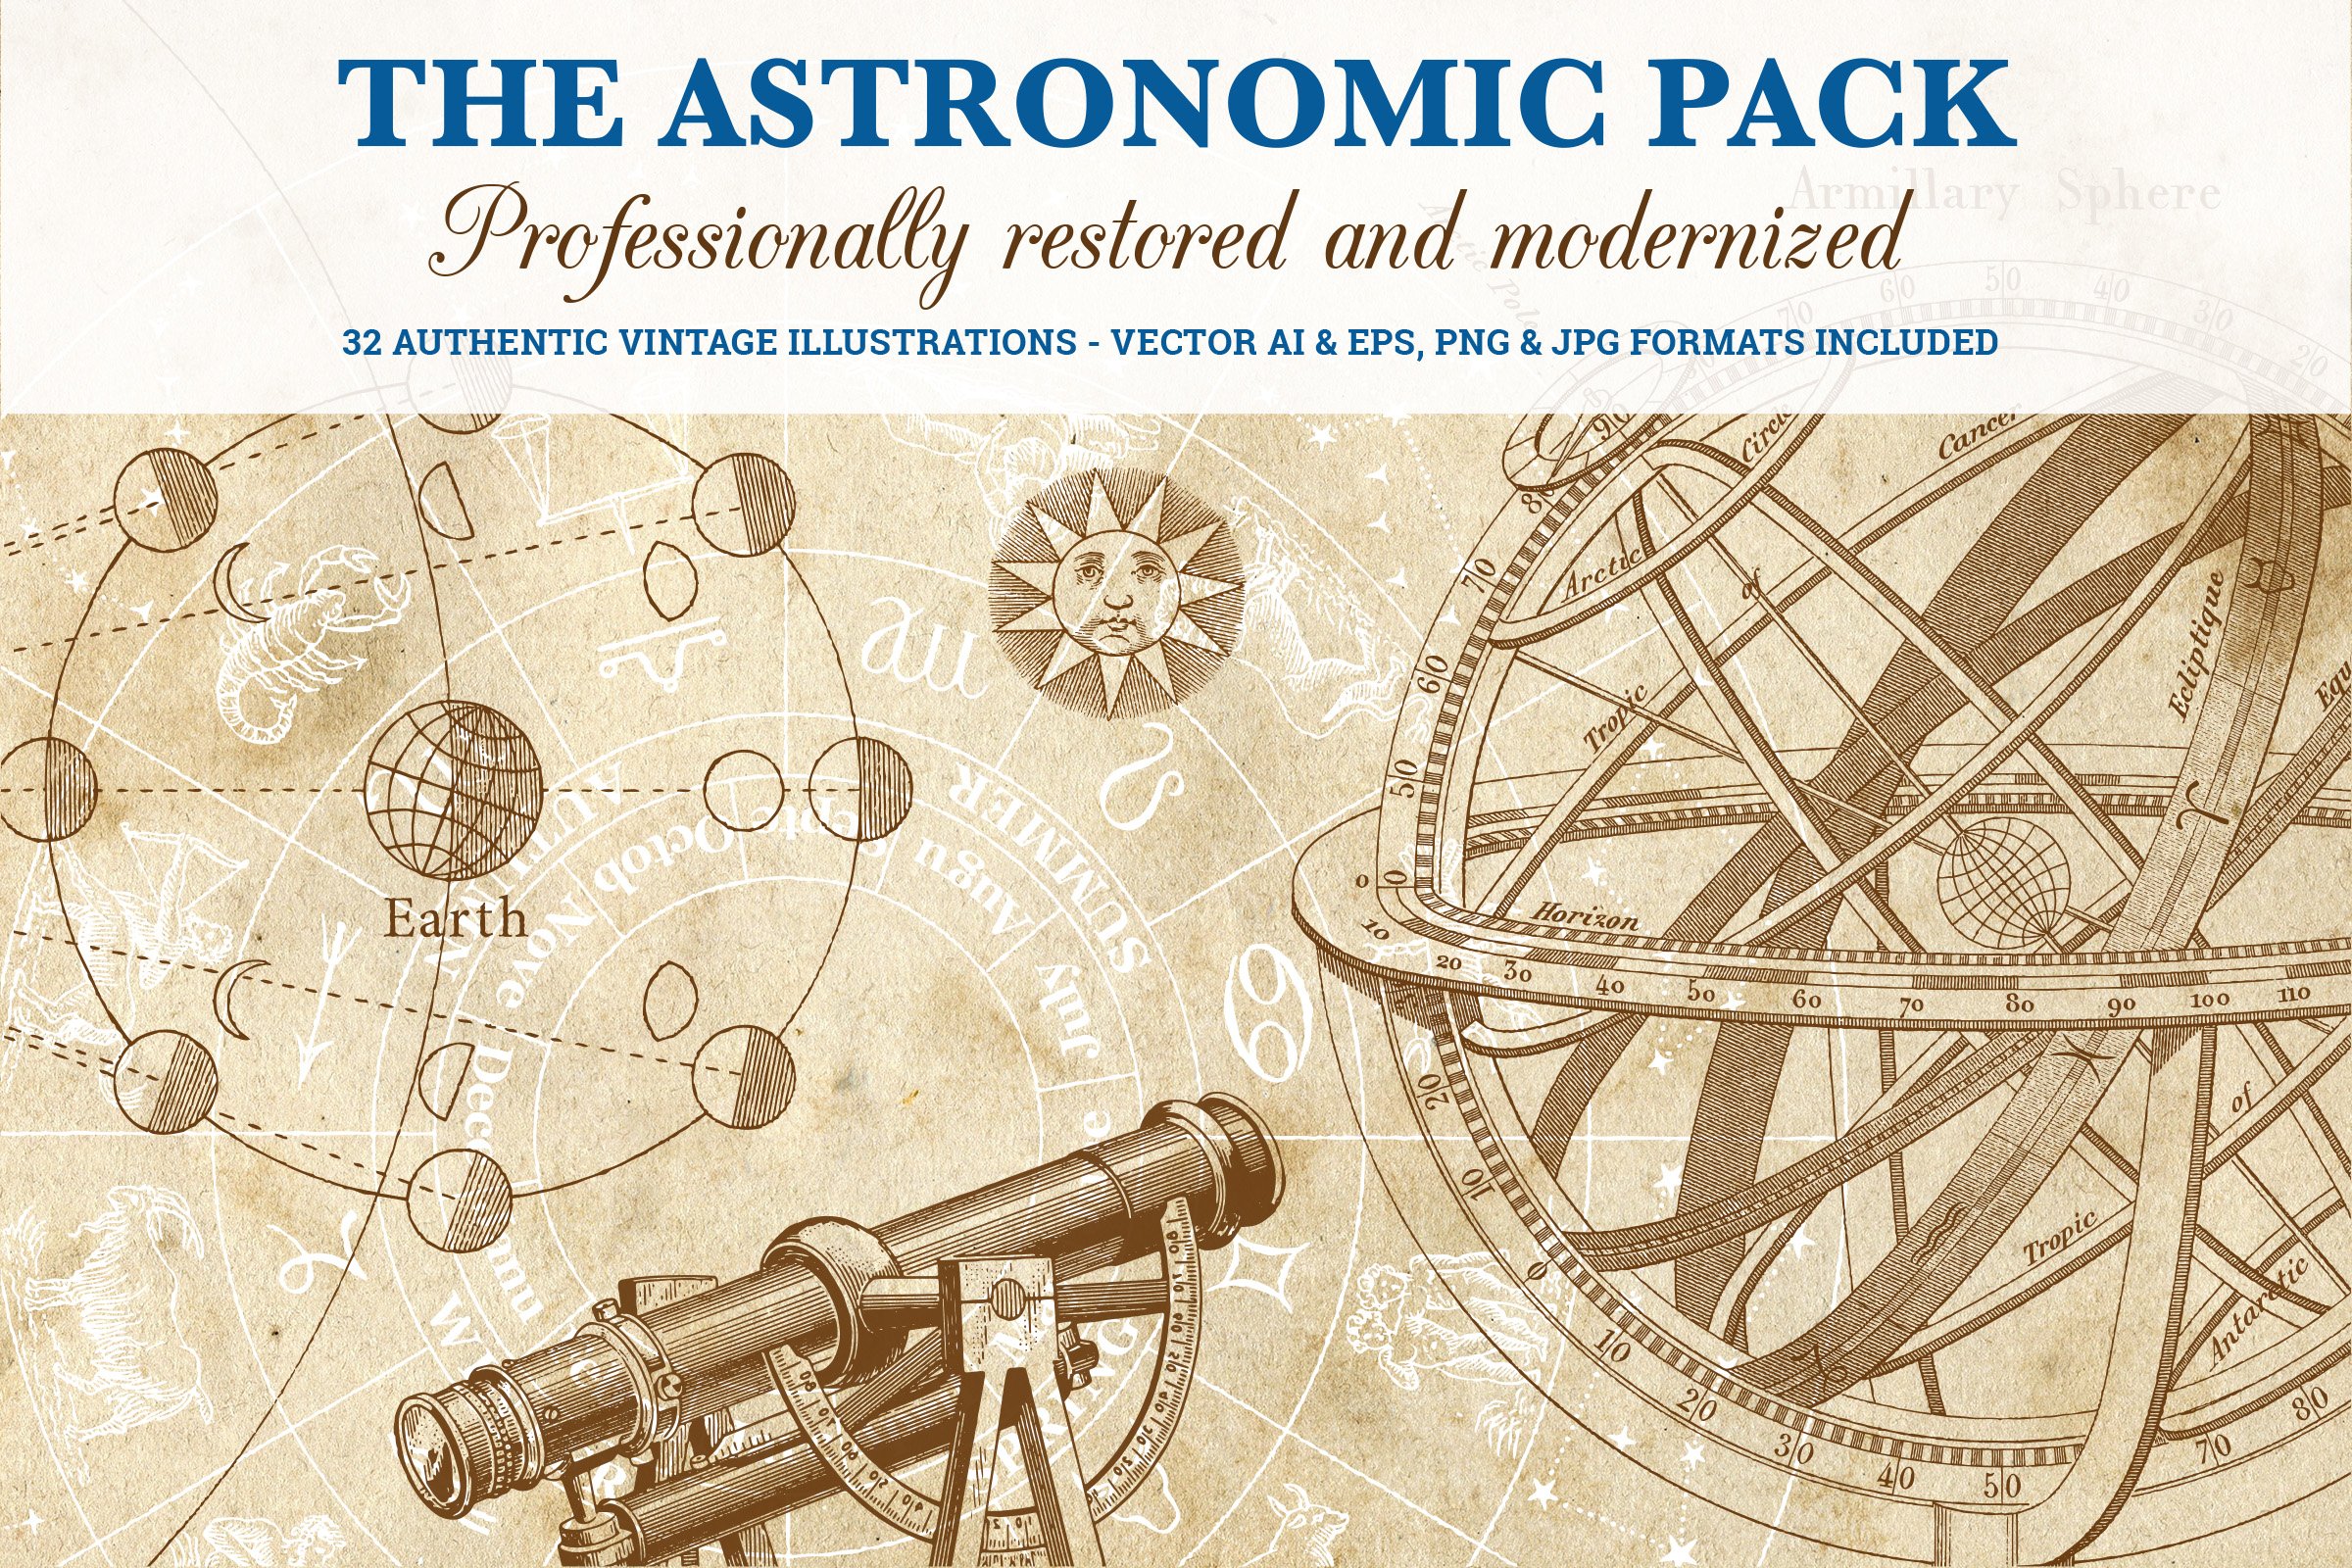 Big Astronomy Illustration Pack cover image.